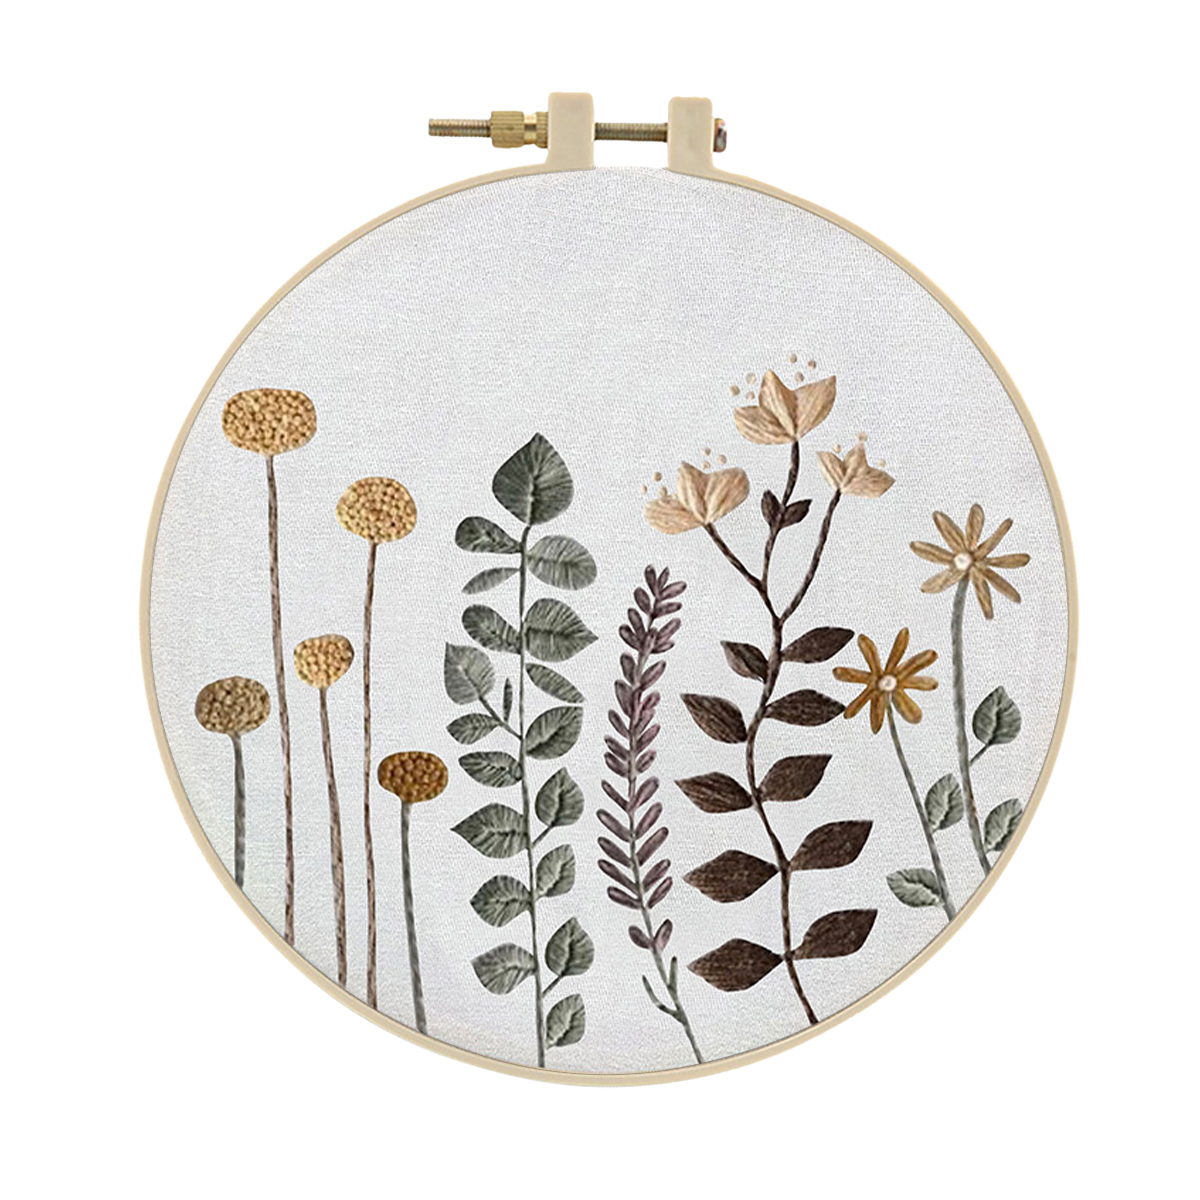 Embroidery Kits Cross stitch kits for Adult Beginner - Floral pattern